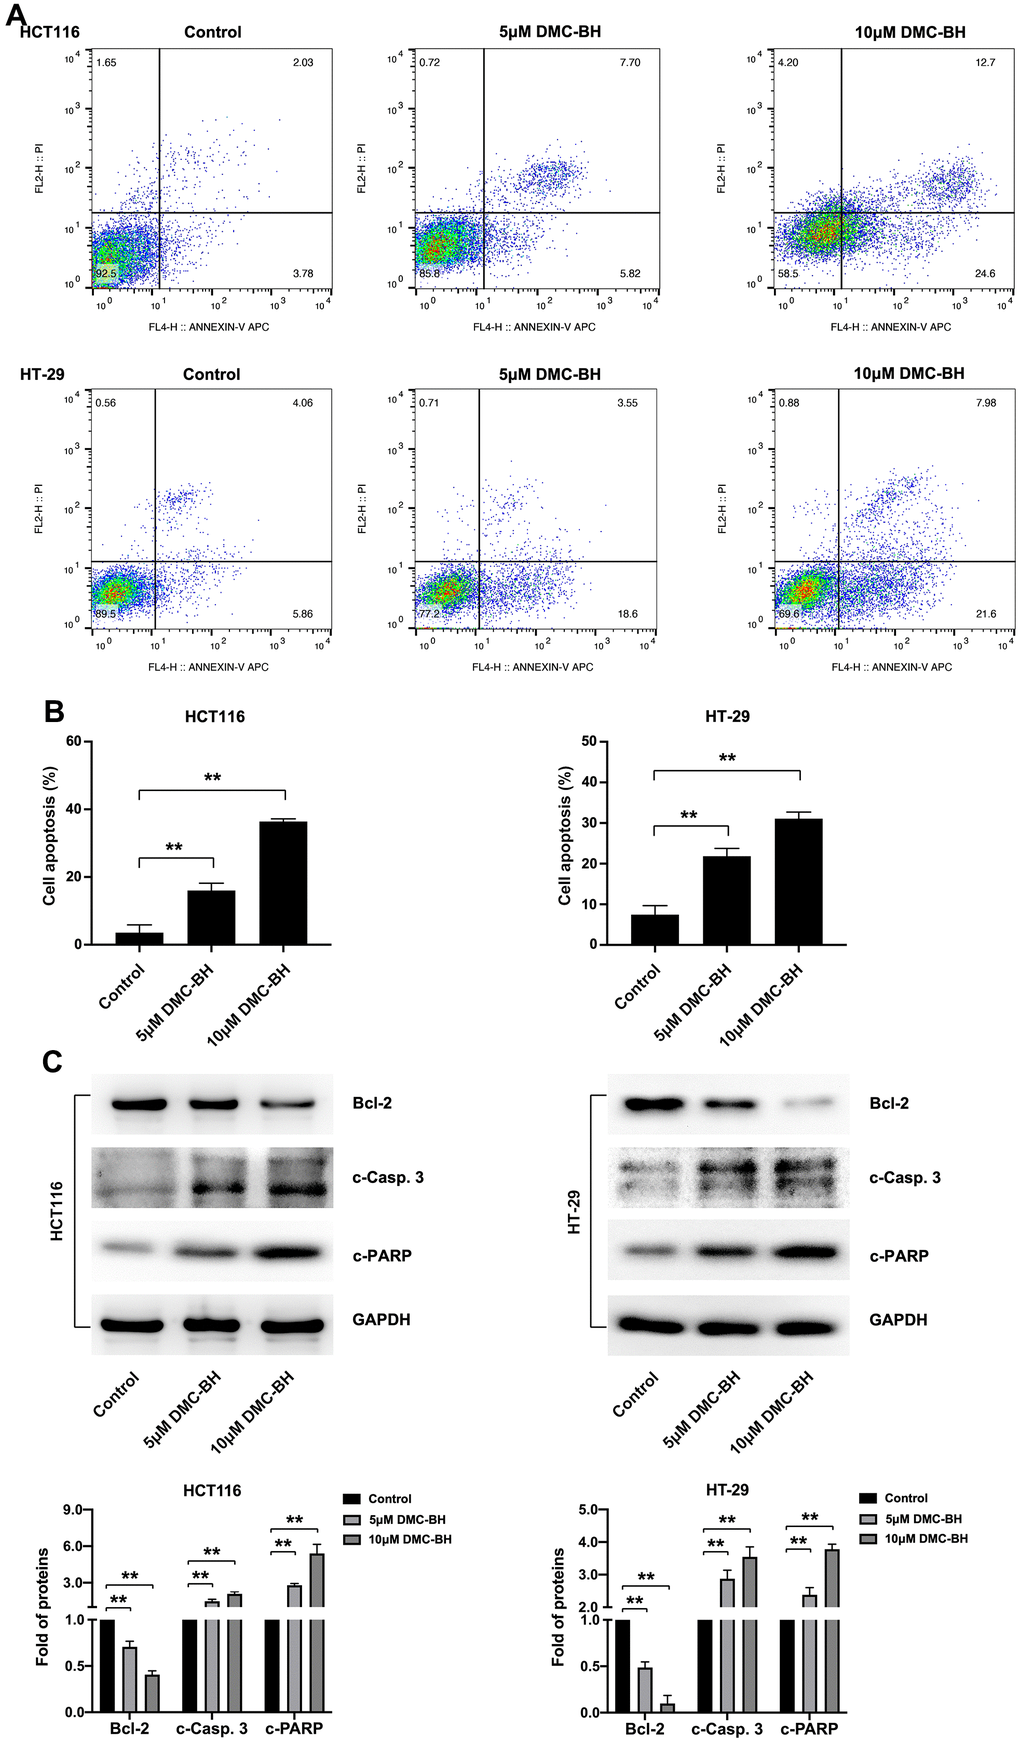 DMC-BH induces the apoptosis of CRC cells. (A) Flow cytometry assay of HCT116 and HT-29 cells after DMC-BH treatment. (B) Apoptosis rates of HCT116 and HT-29 cells after DMC-BH treatment. (C) Western blot analysis of the apoptosis-related proteins Bcl-2, c-PARP, and c-Casp. 3.